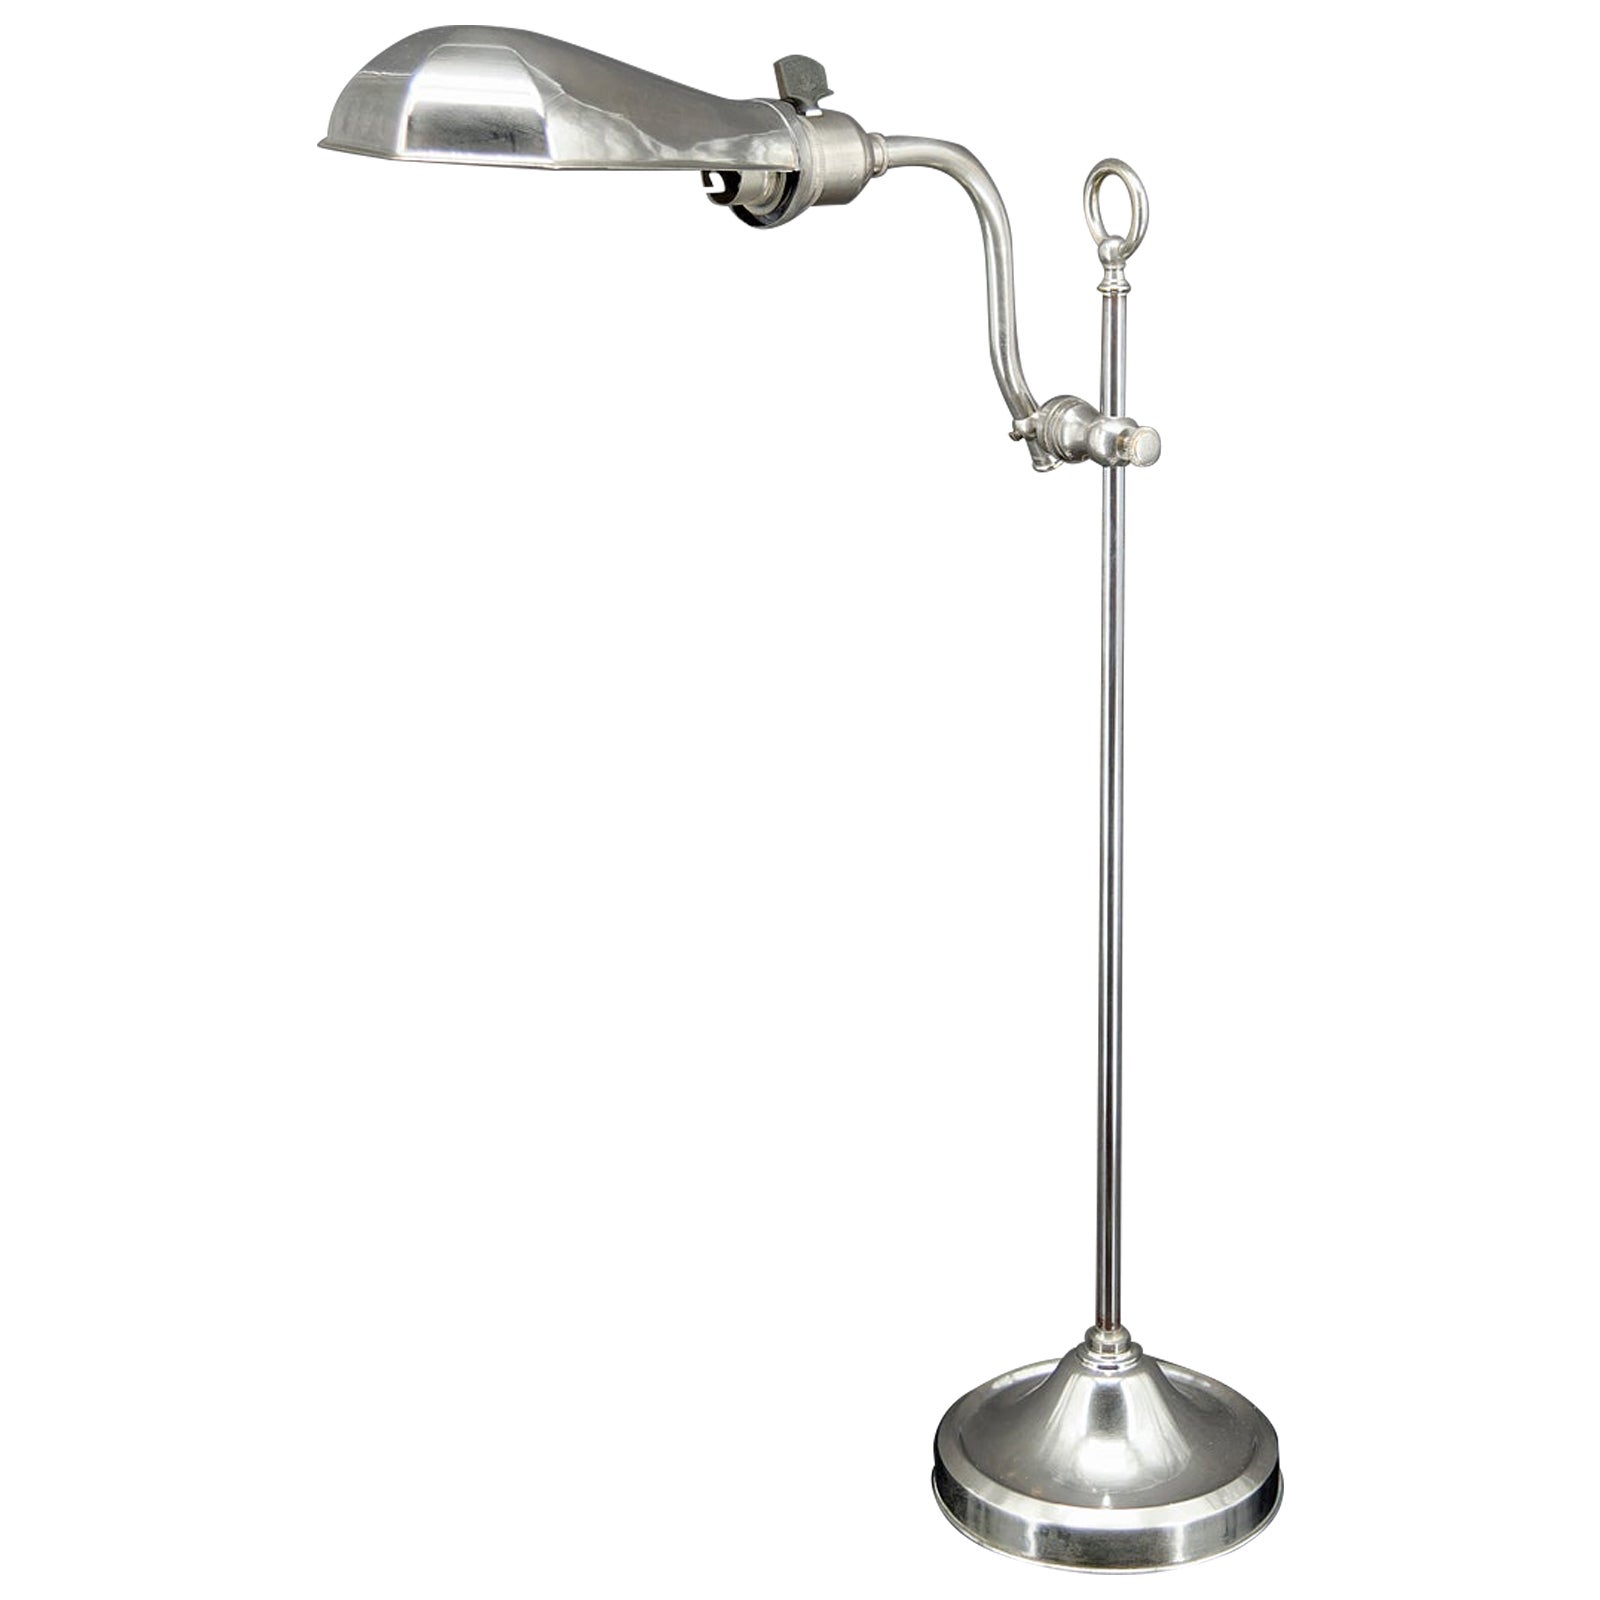 Workshop lamp in aluminum and nickel, adjustable with raise-lower system, France For Sale